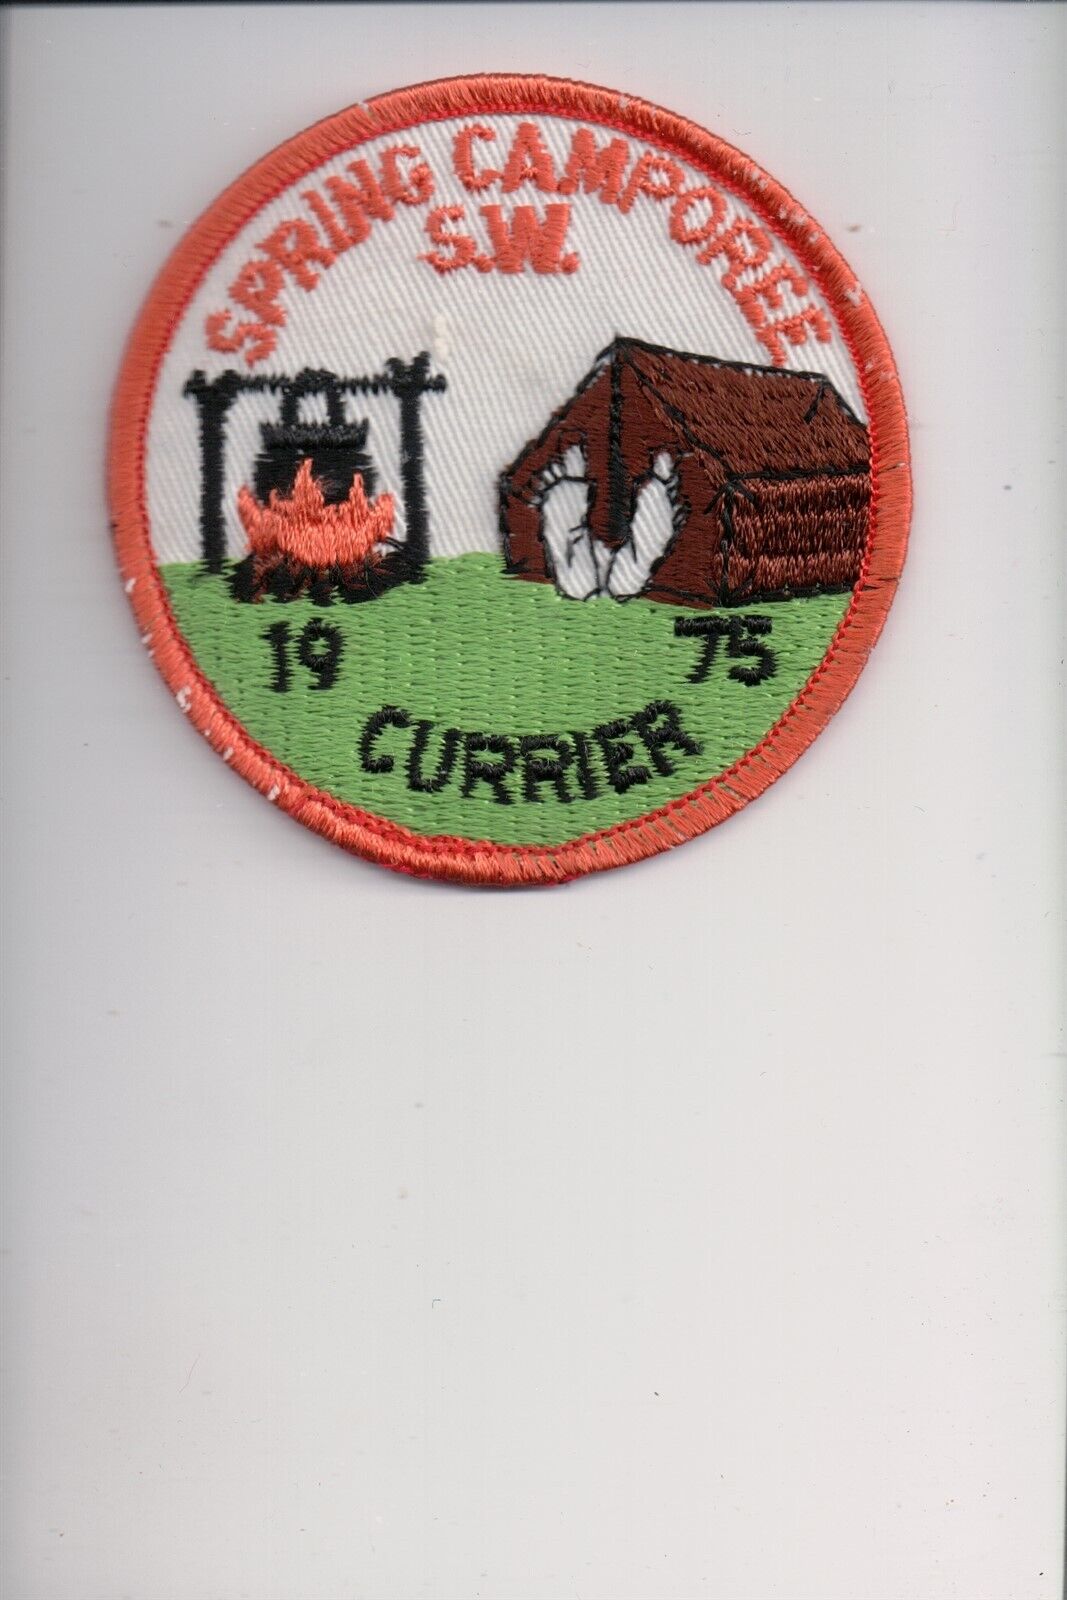 1975 Camp Currier Spring Camporee patch